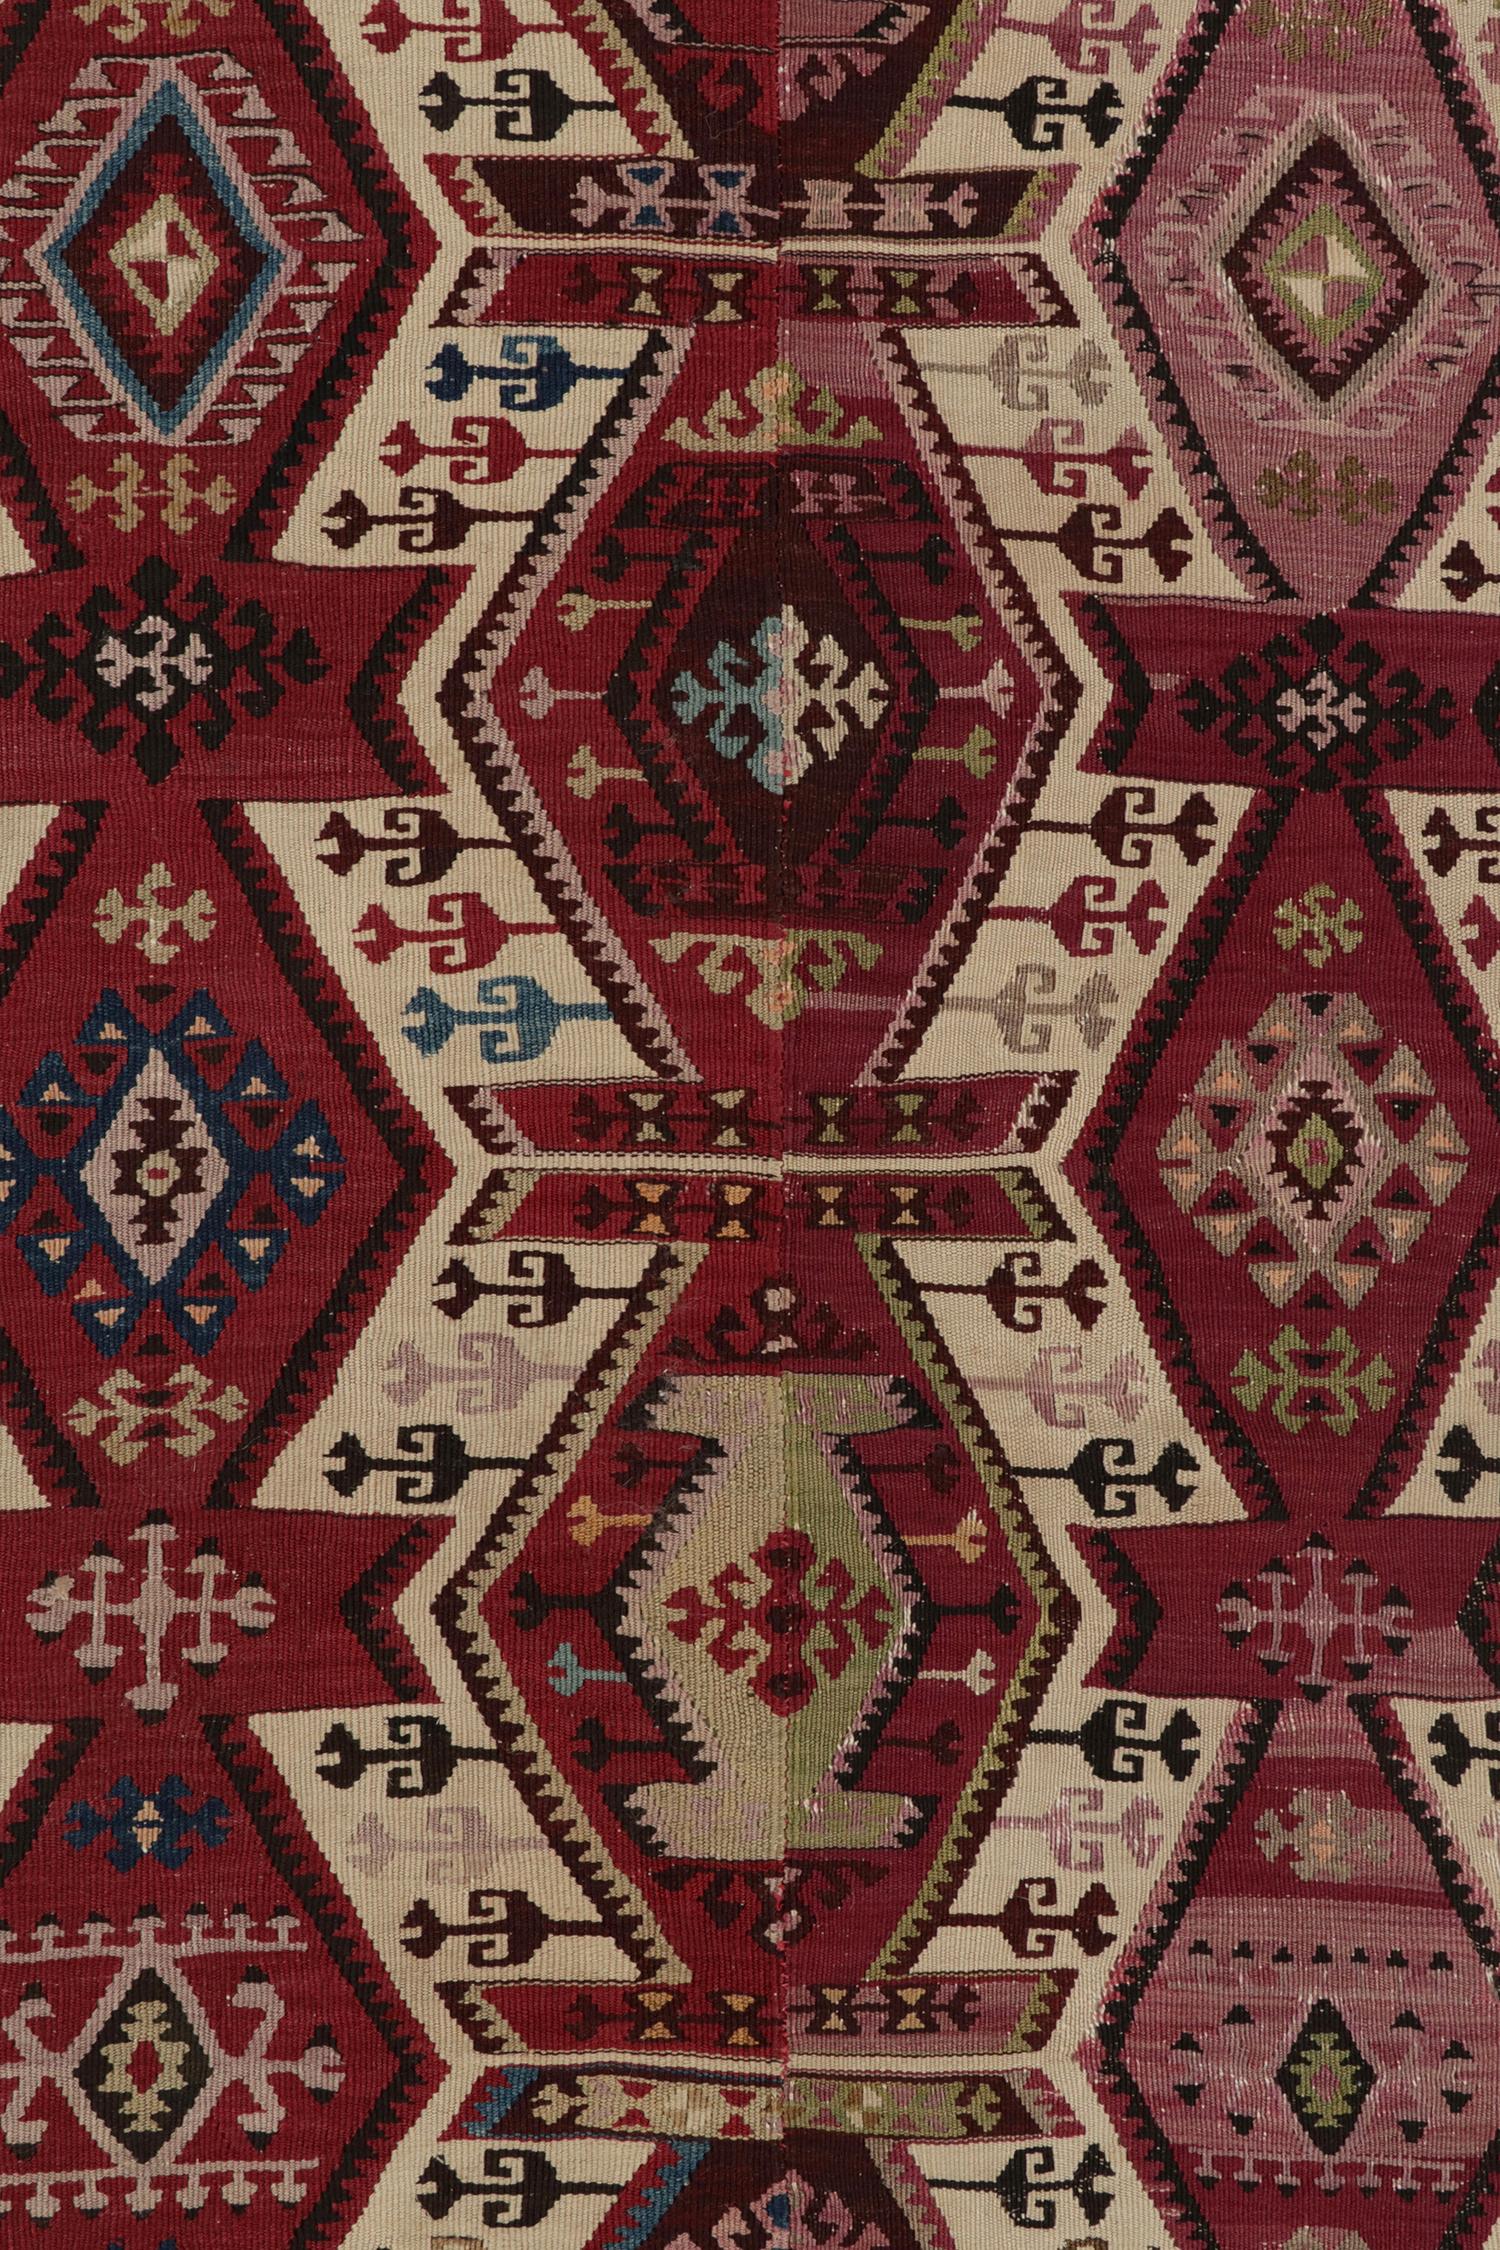 Antique Kilim Rug in Red, Brown, Beige Tribal Geometric Pattern by Rug & Kilim In Good Condition For Sale In Long Island City, NY